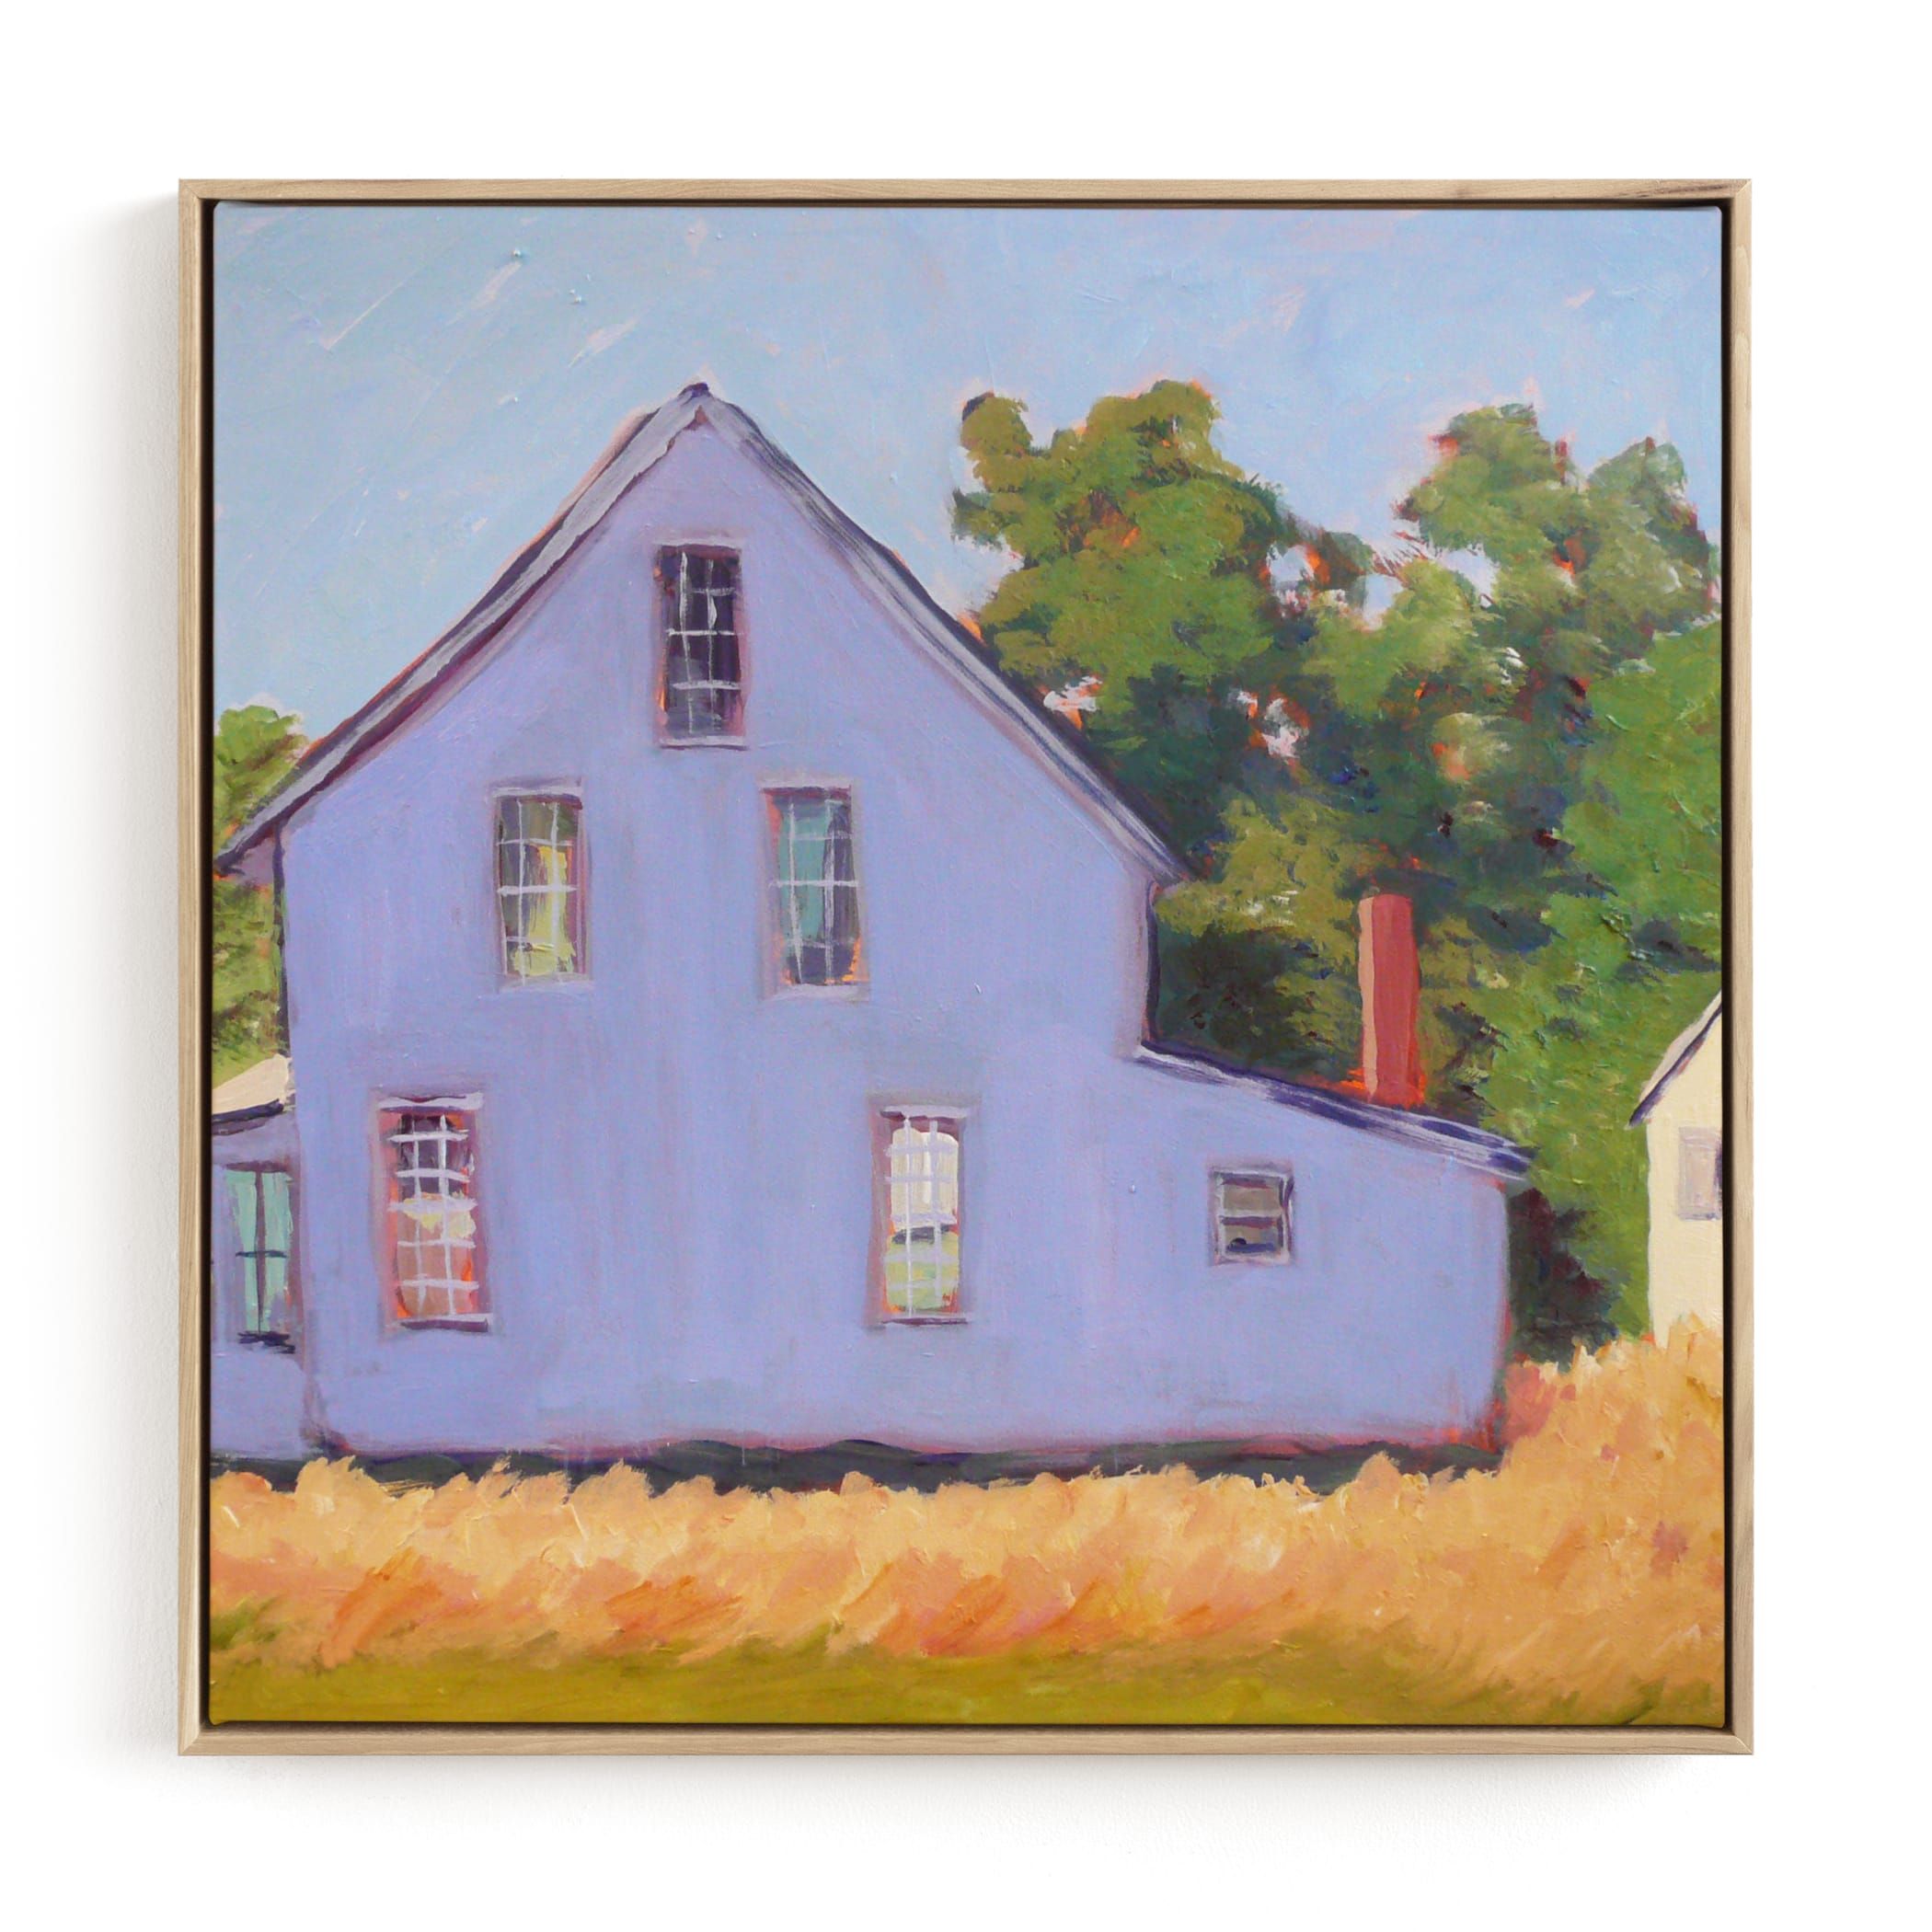 "Corner Farm House" - Painting Limited Edition Art Print by Carol C. Young. | Minted